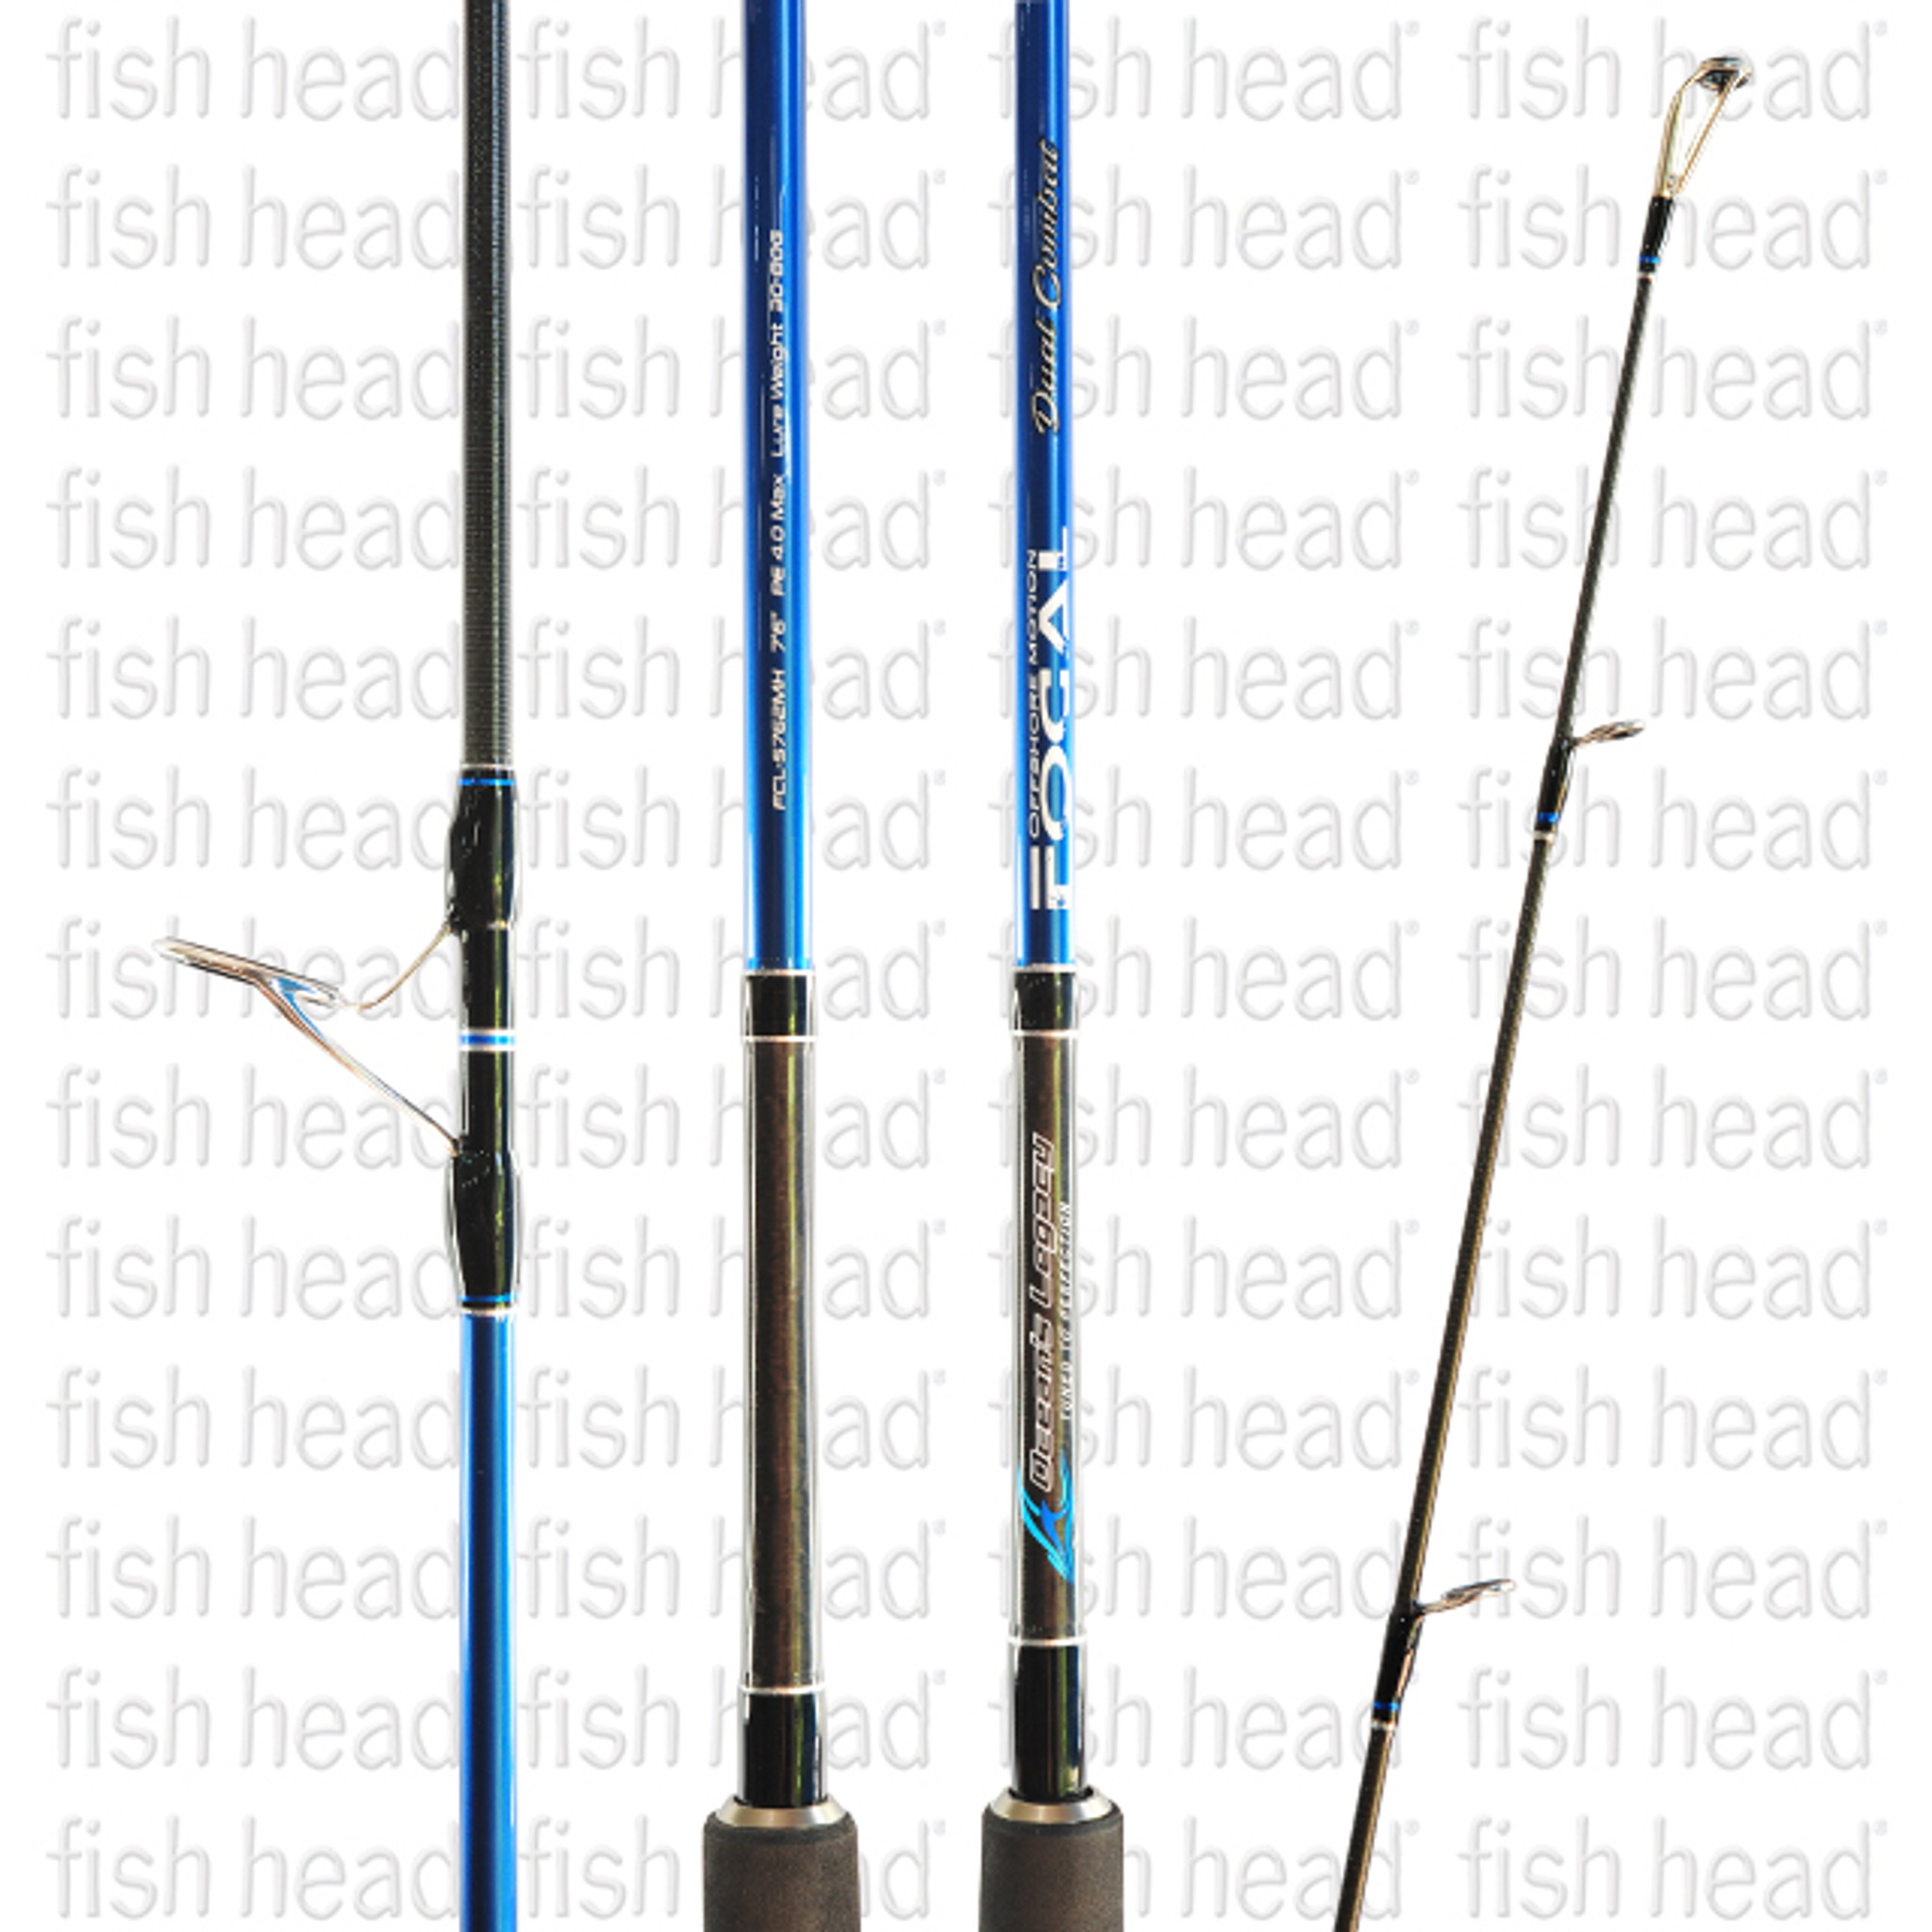 Oceans Legacy Focal Spin Series Spinning Rods - Fish Head